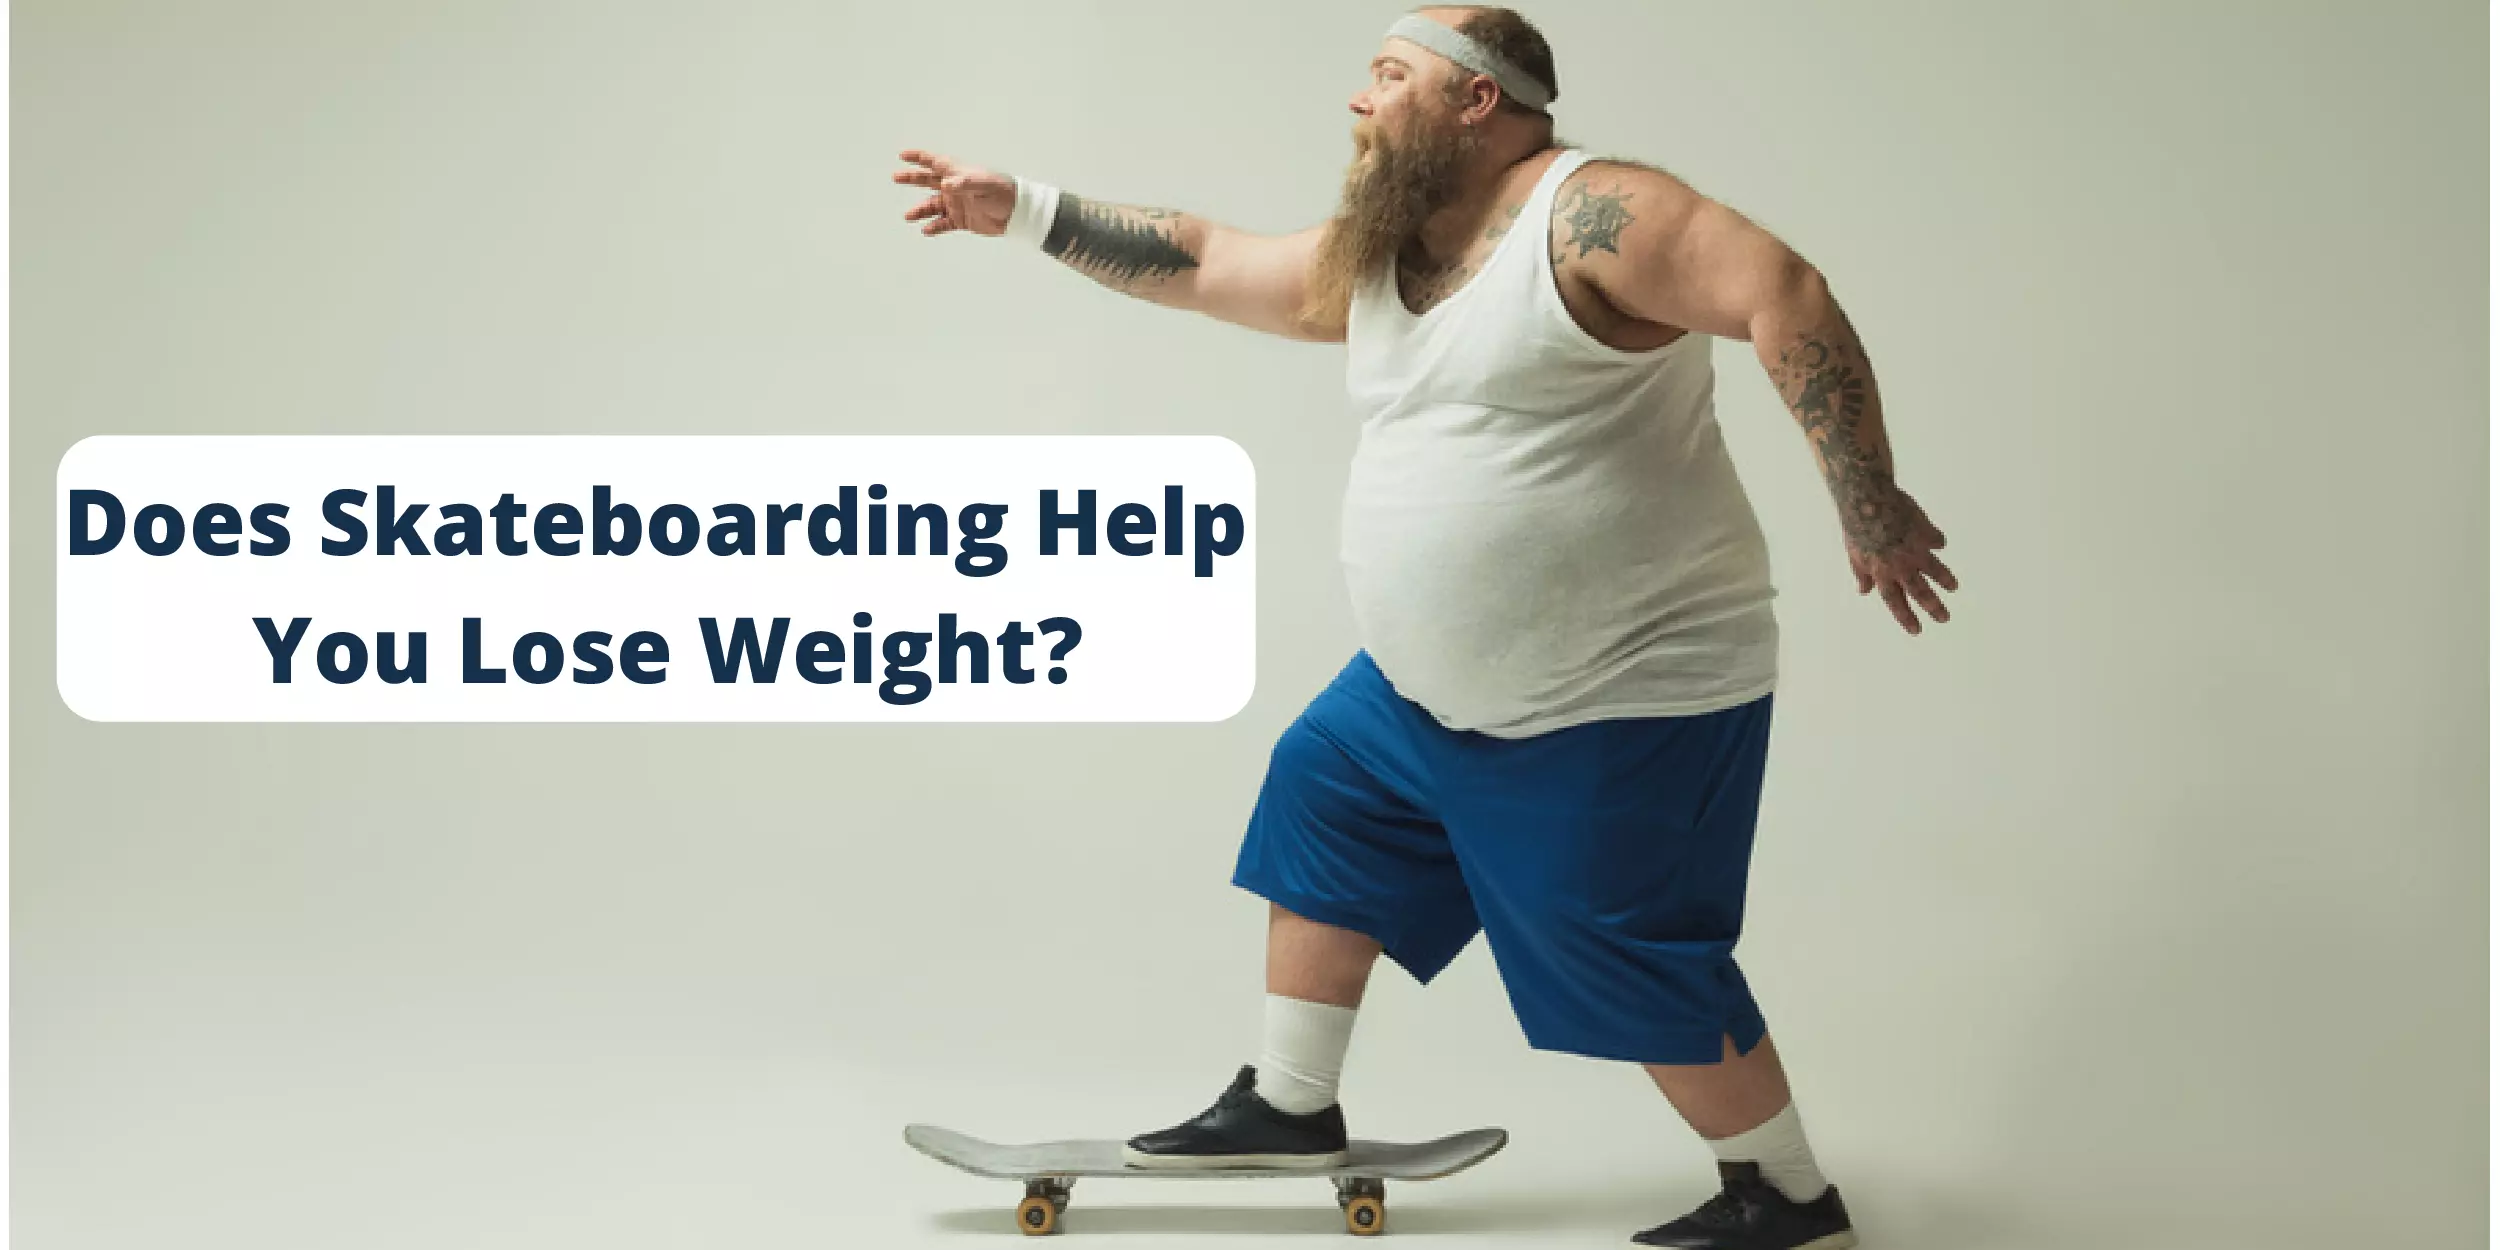 Does Skateboarding Help You Lose Weight?